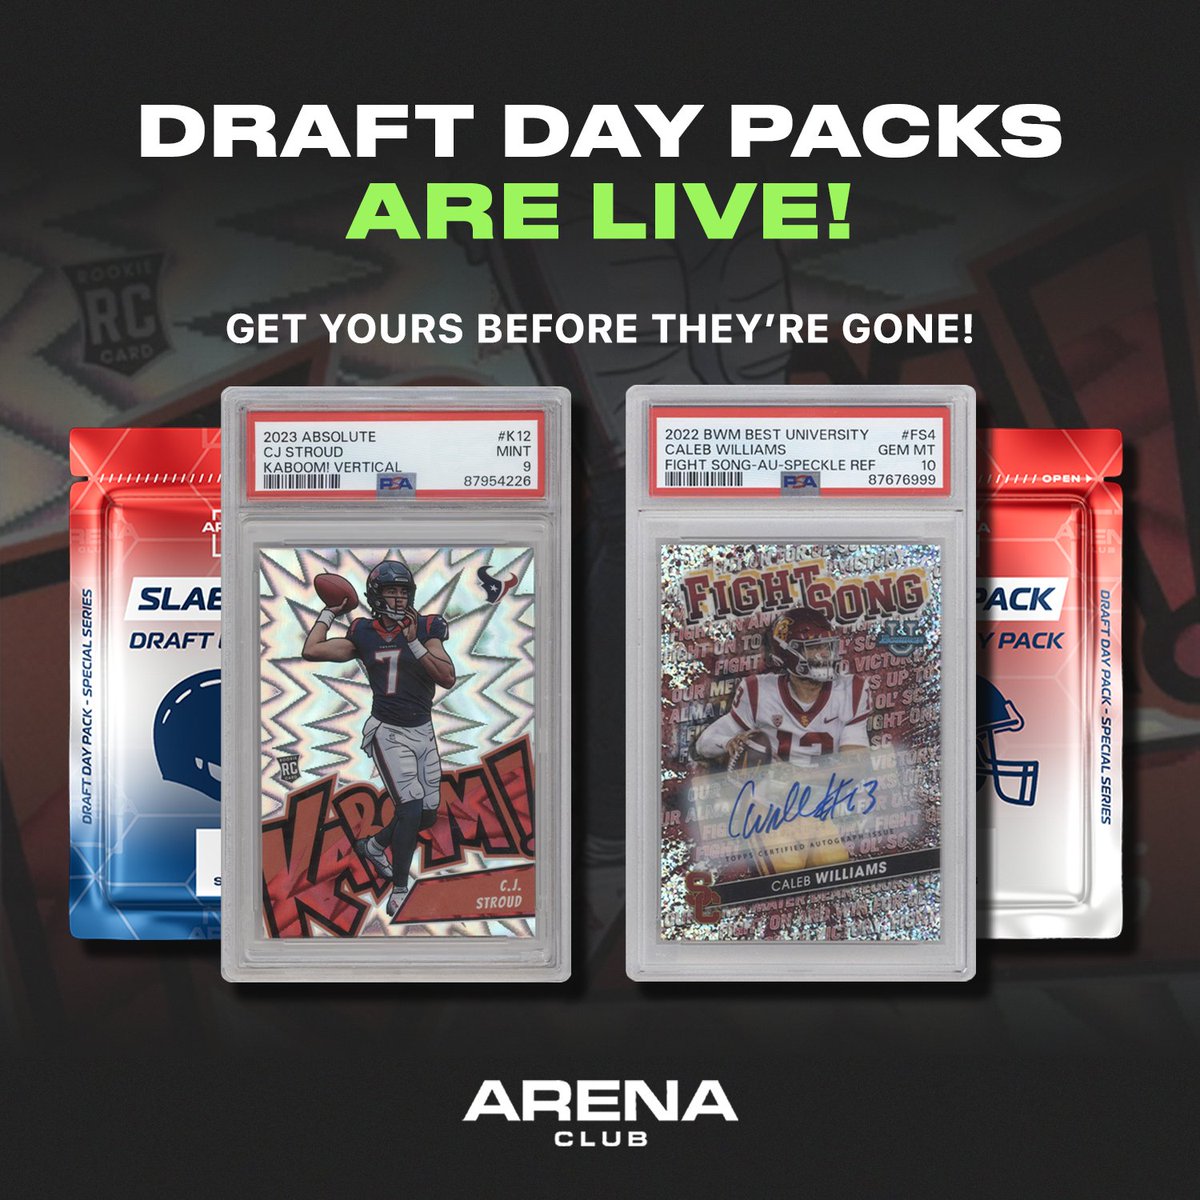 Draft Day Packs are Live! 🔥 🏈 Some of the major chasers are a CJ Stroud PSA Kaboom, a Caleb Williams Speckle Refractor Auto and many more awesome hits! 🤯 #arenaclub #slabpacks